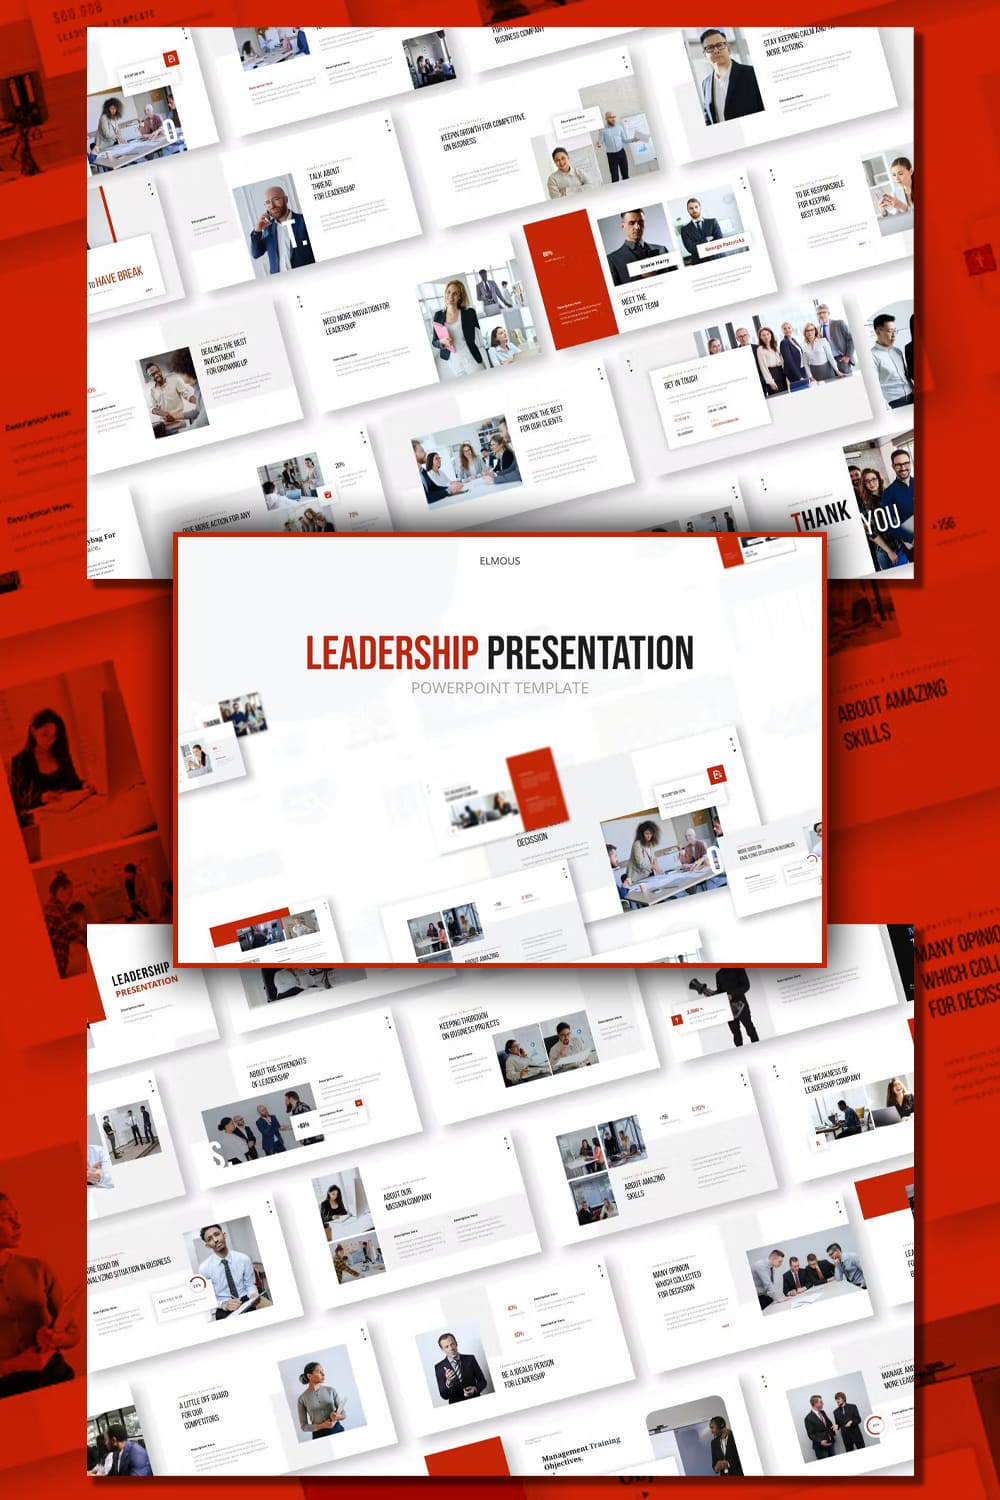 A collection of images of great presentation template slides on the theme of leadership.